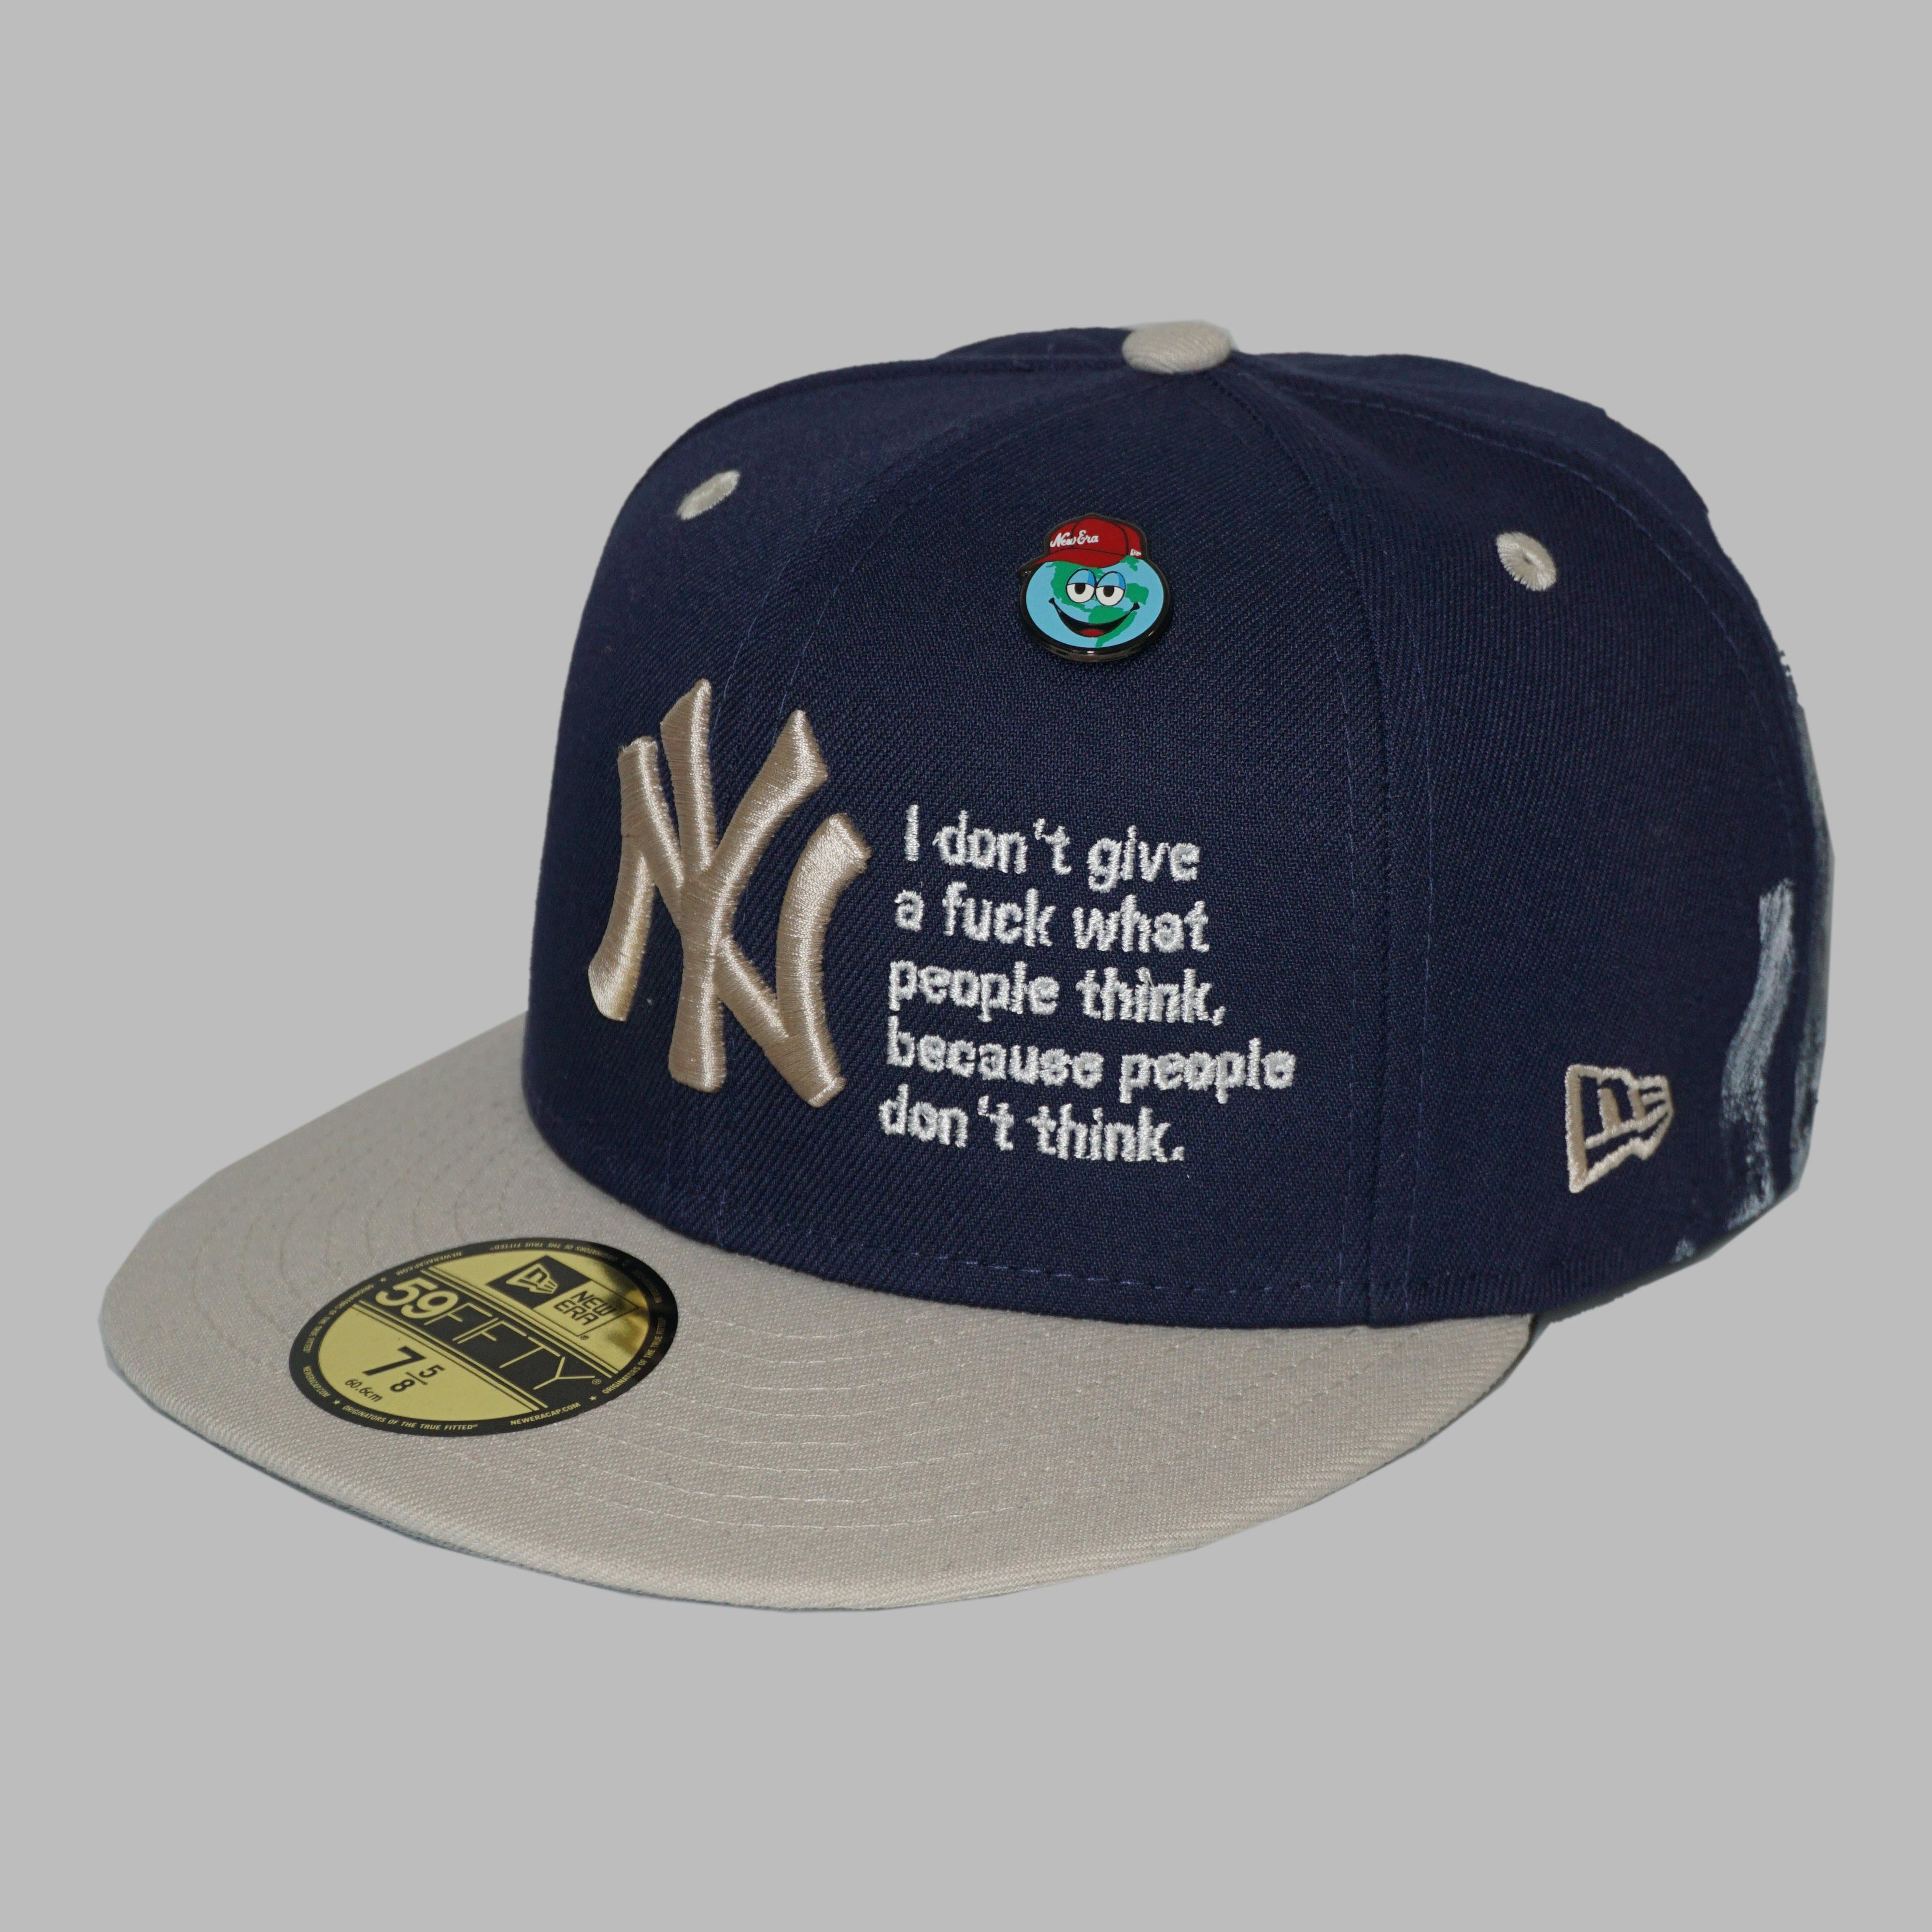 NAVY WISDOM FITTED (size 7 5/8)